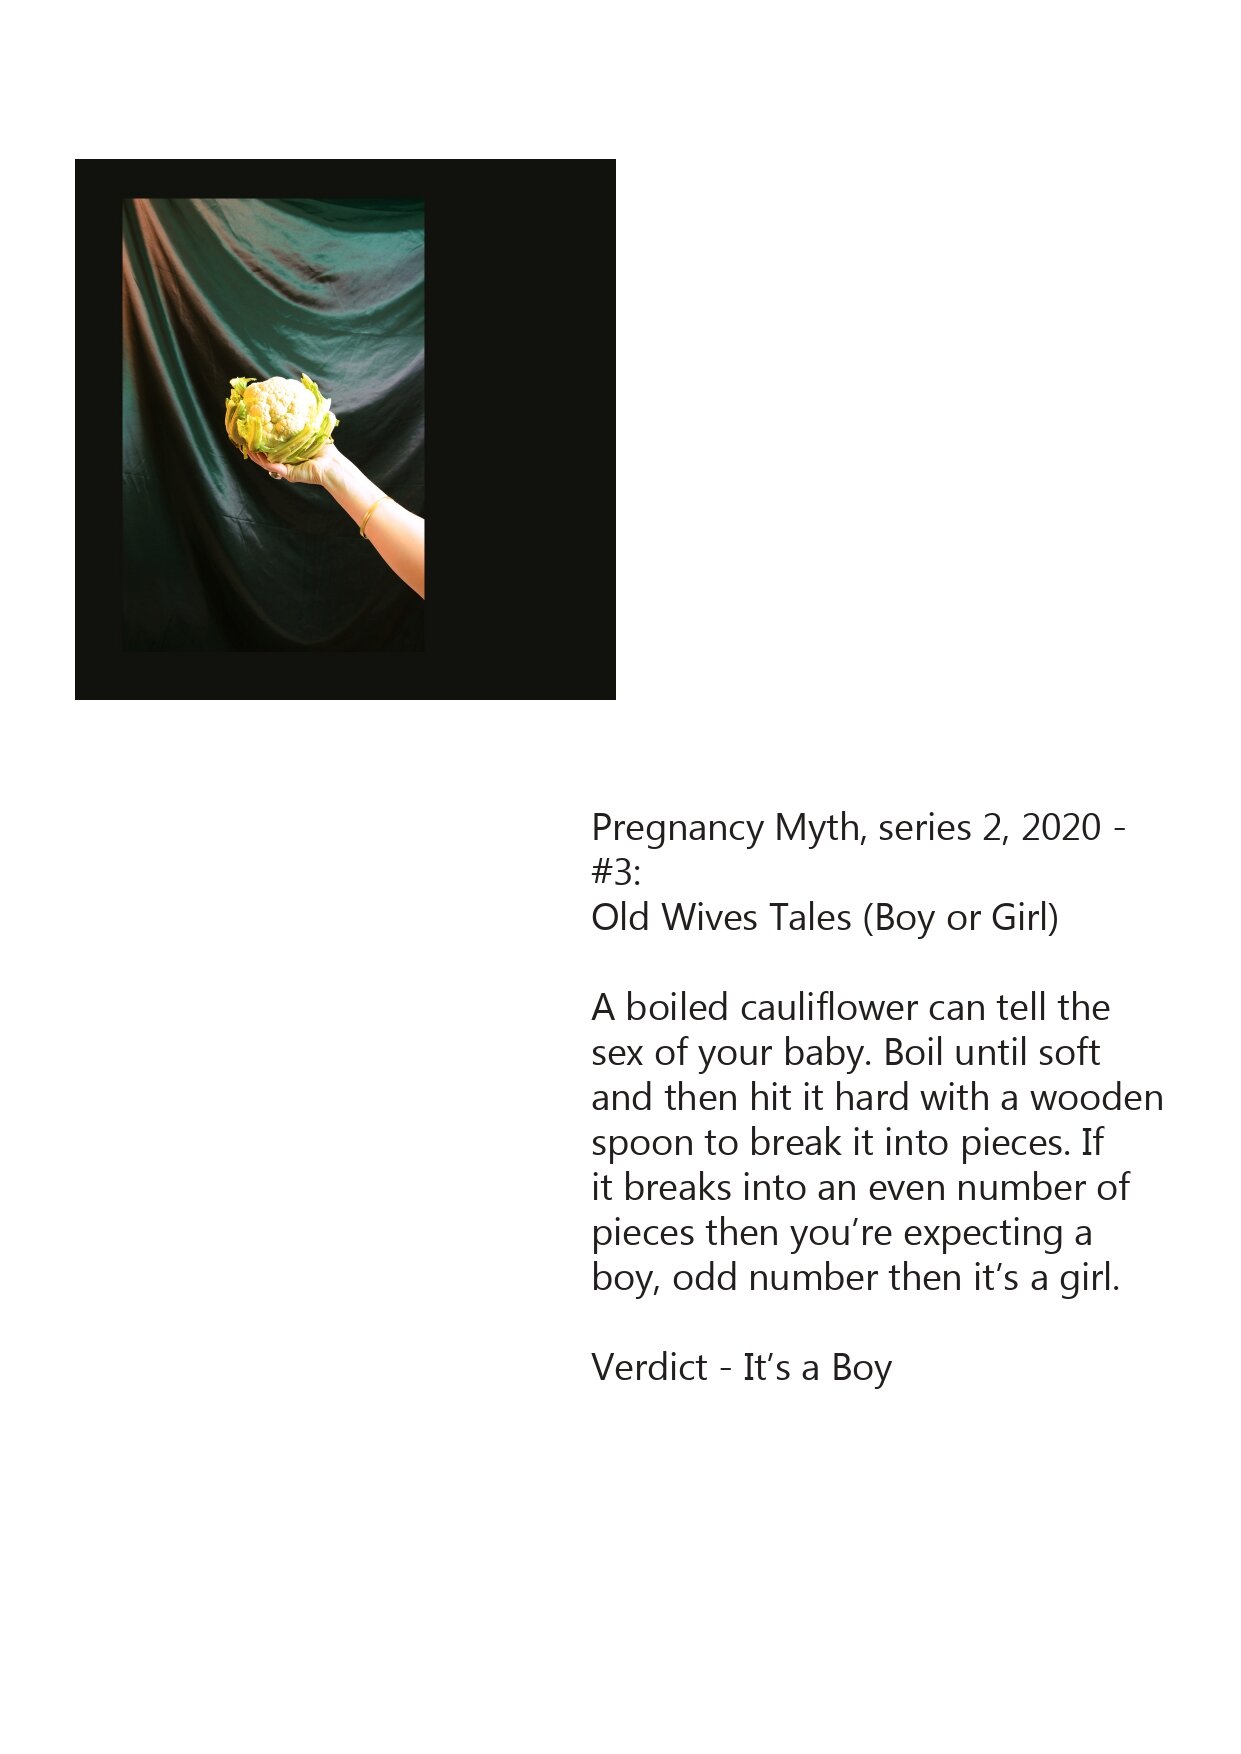 Pregnancy Myth, series 2 Old Wives Tales (Boy or Girl) — georgie white winter photo